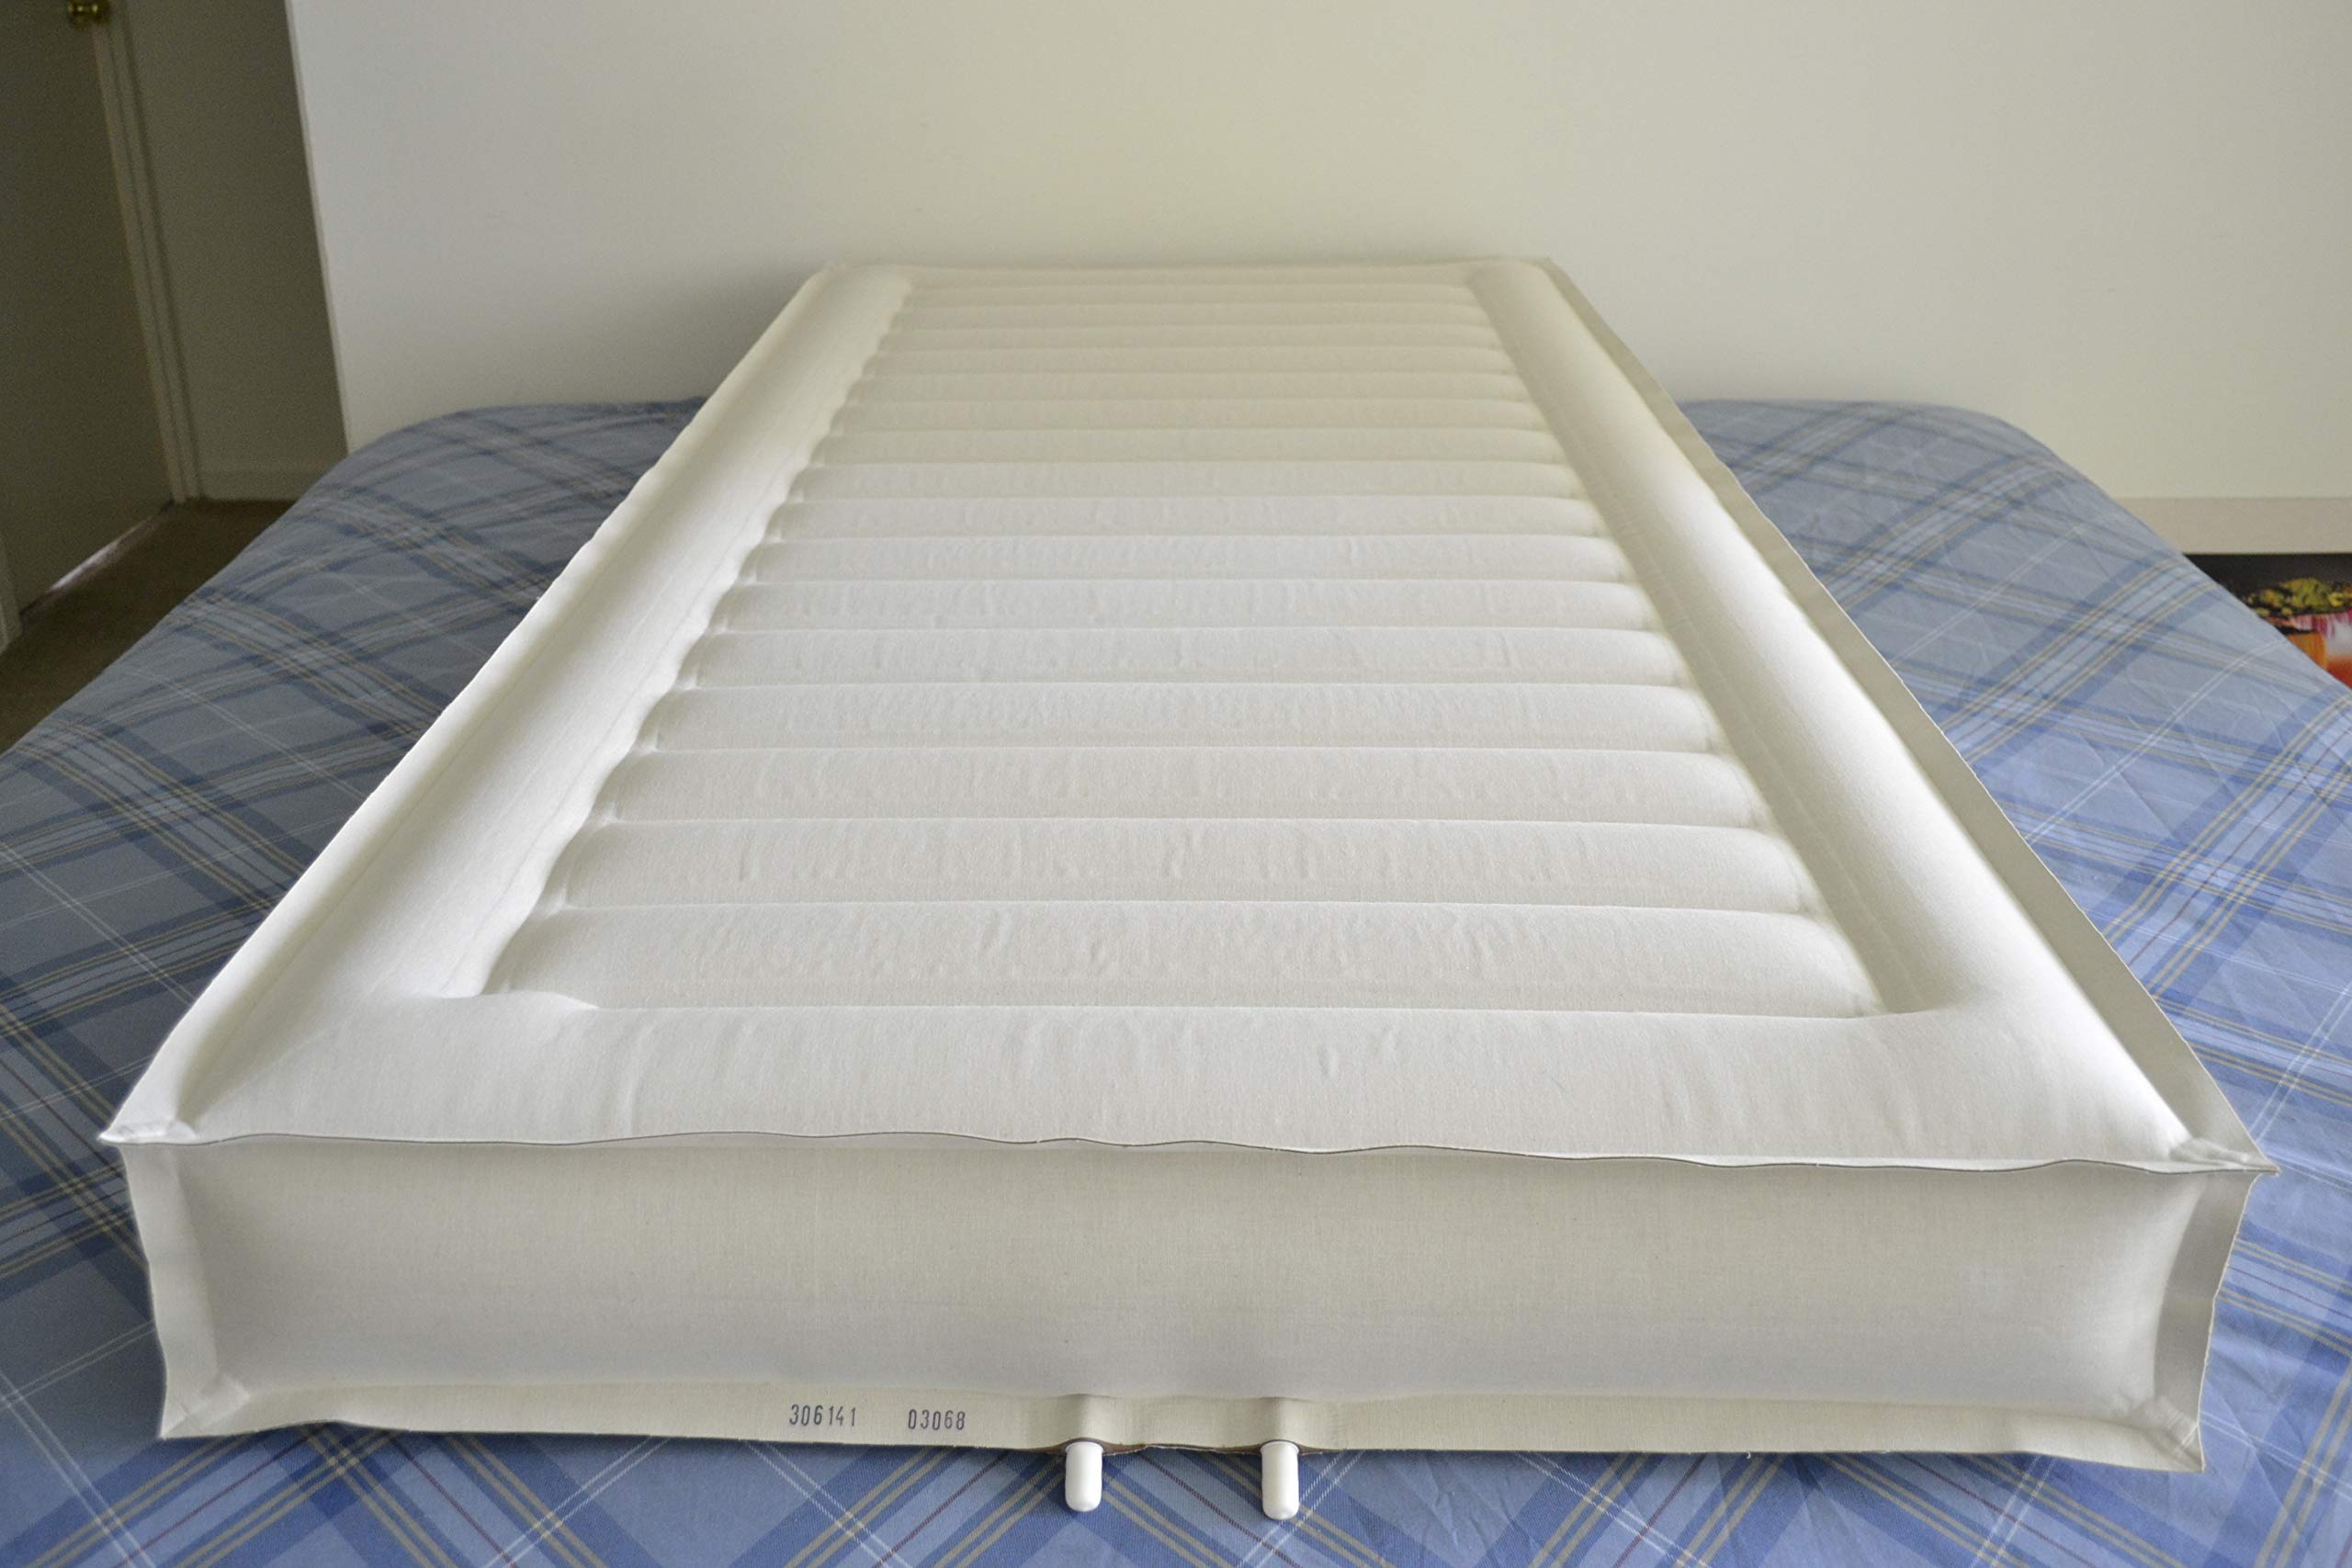 How To Inflate A Sleep Number Bed